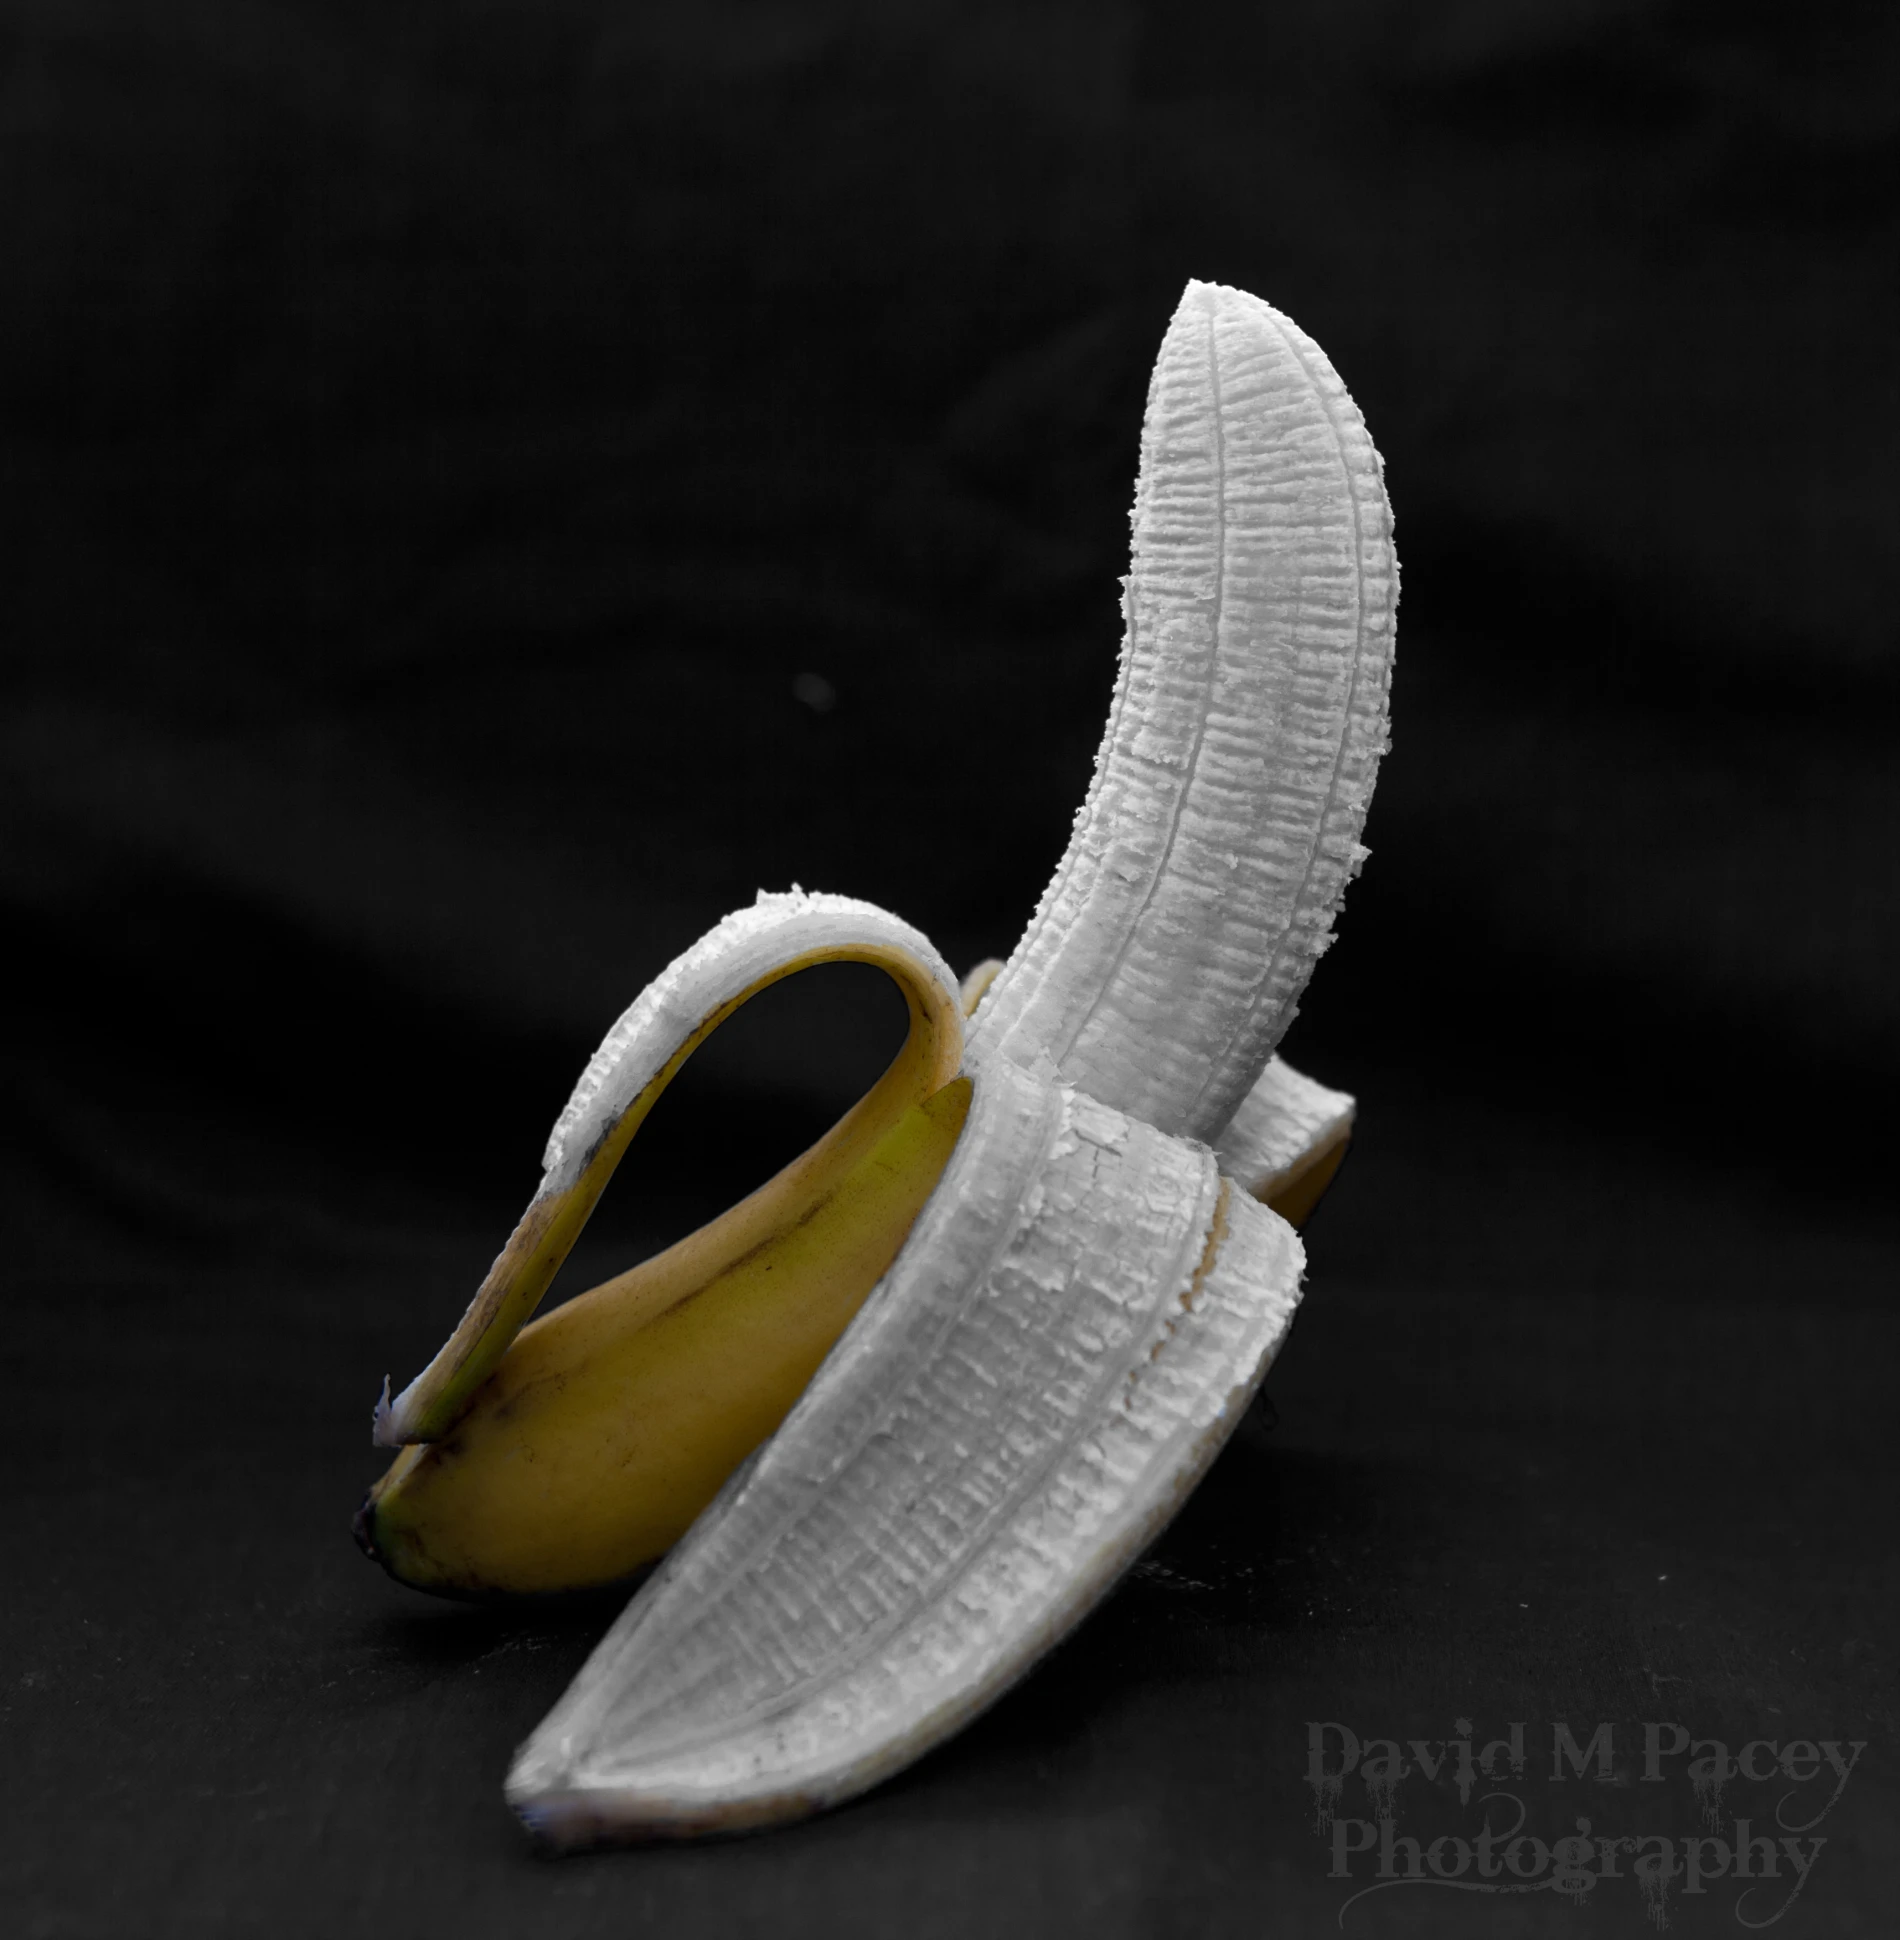 an overripe banana has been peeled and put in the shape of a banana